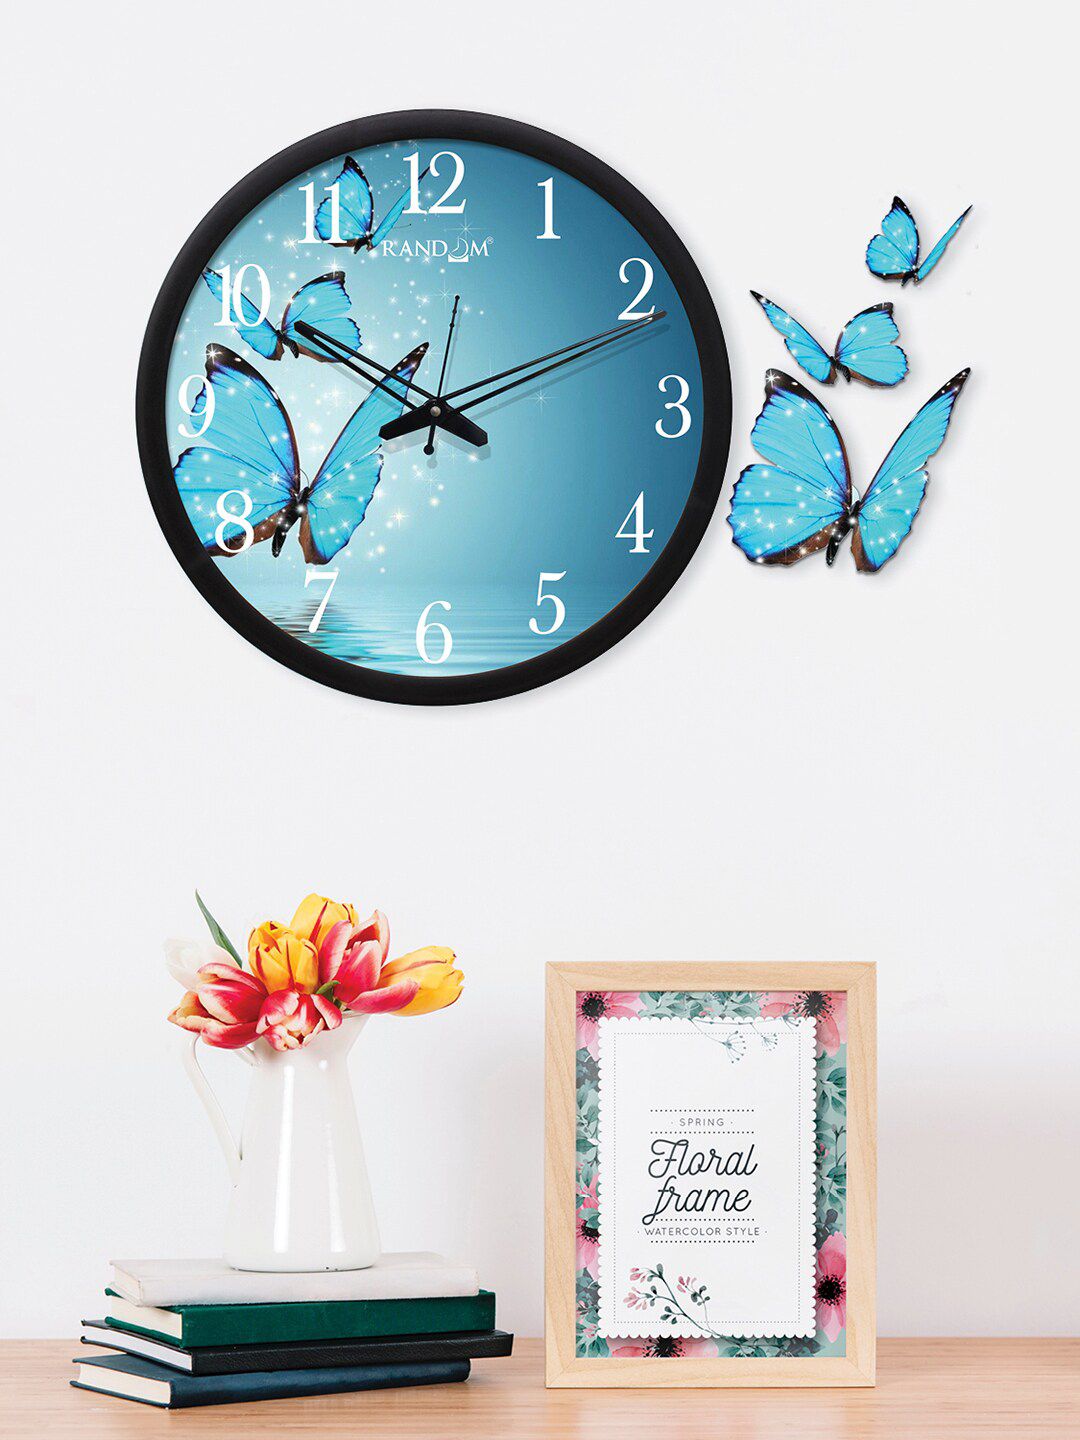 RANDOM Unisex Blue & Black Printed Analogue Wall Clock with 3 Decorative Plaques Price in India